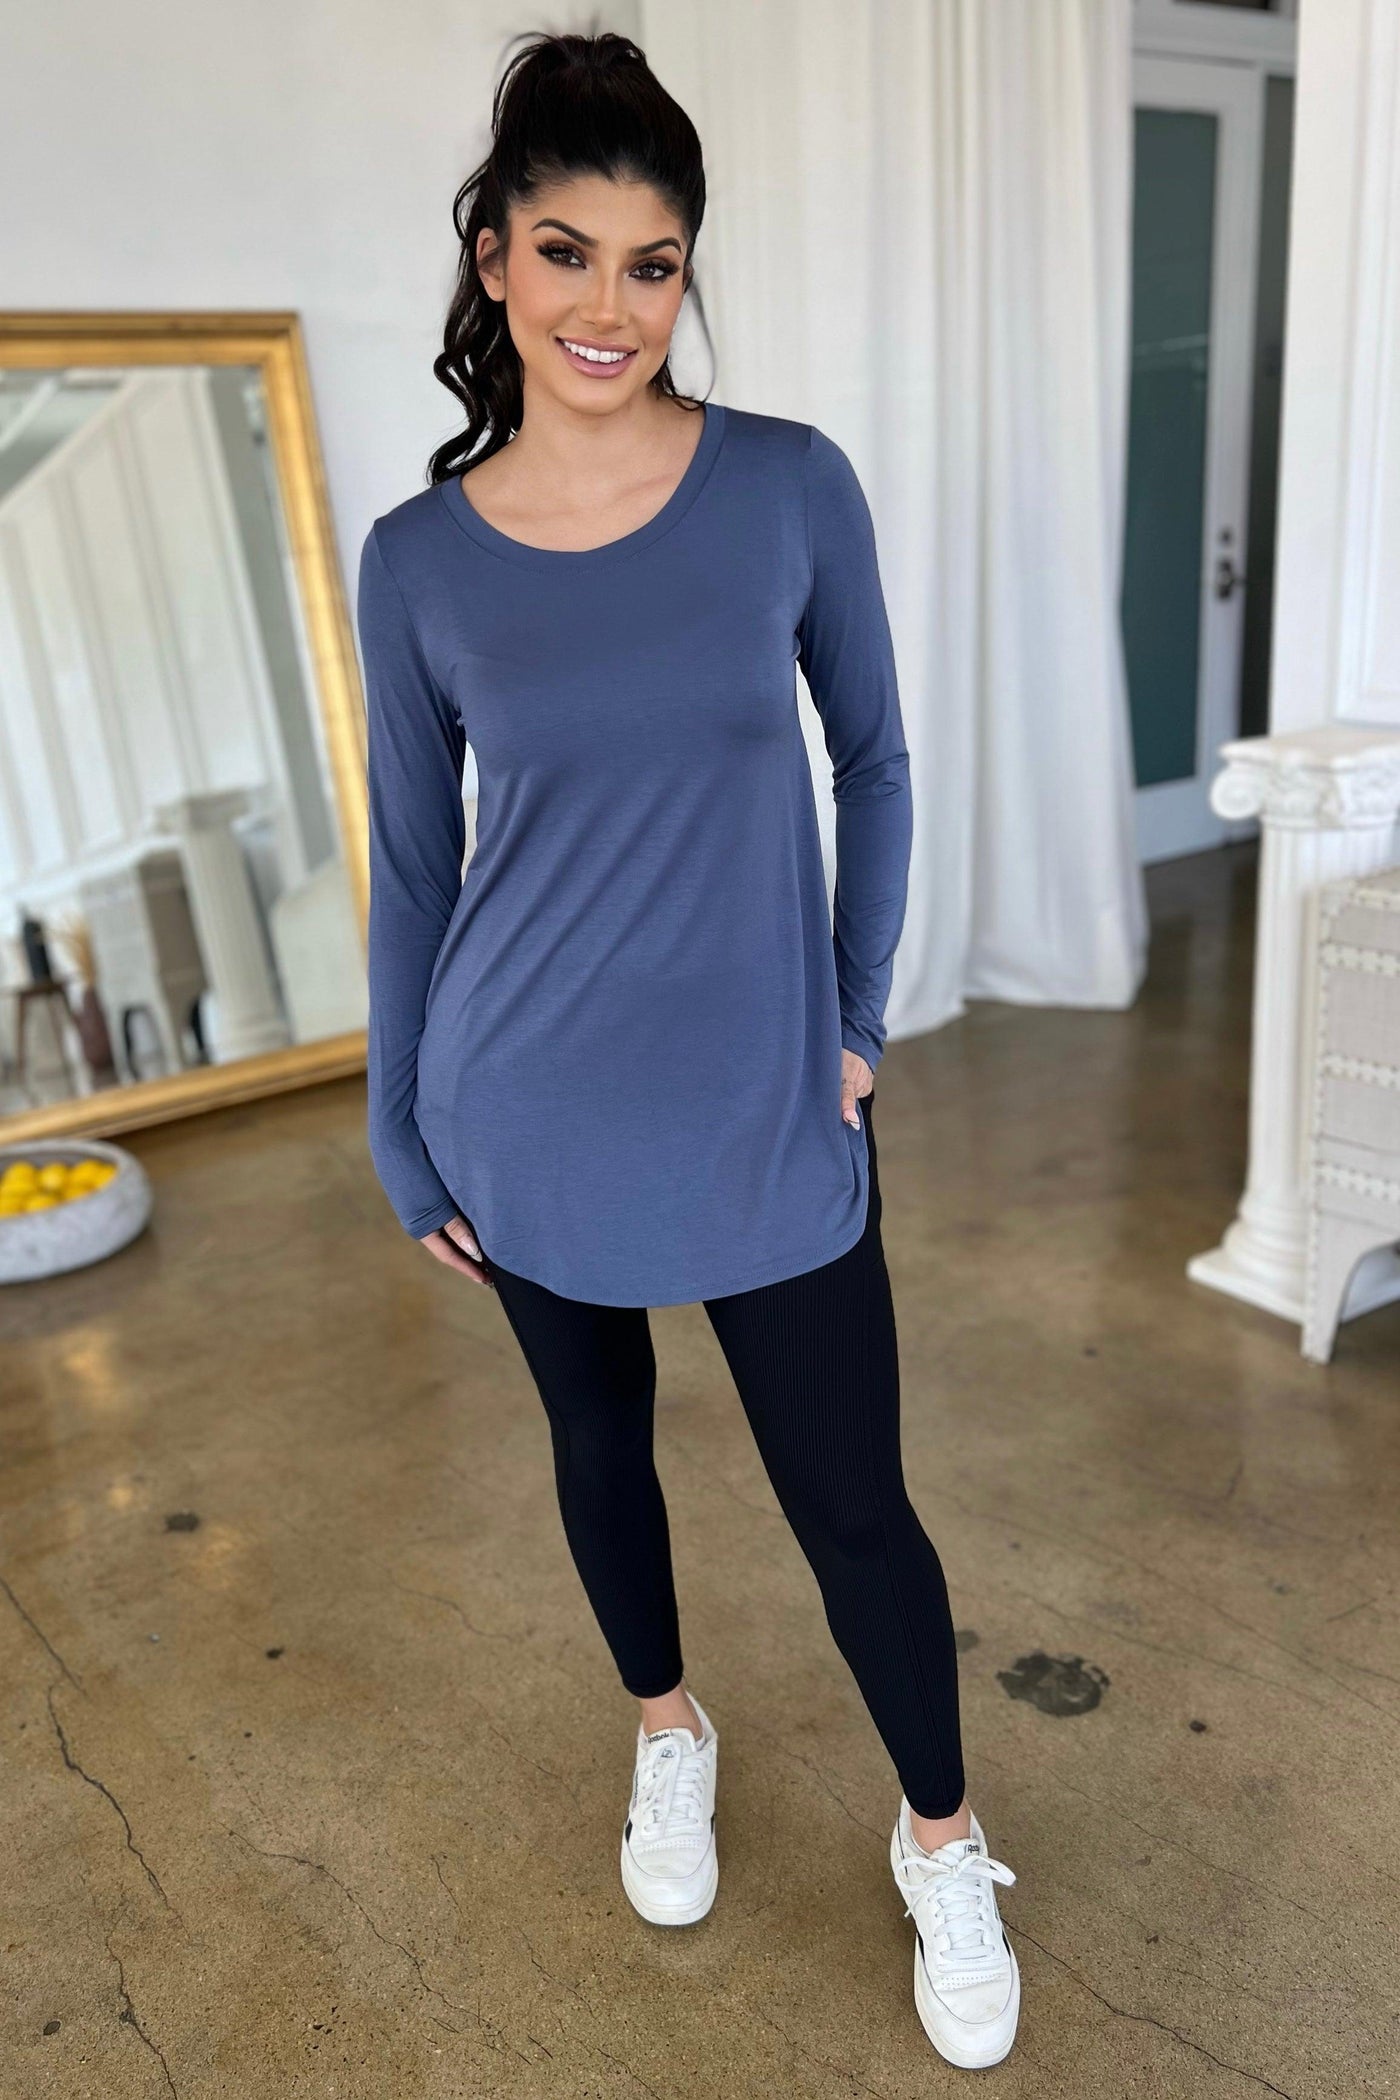 BEVERLY LONG SLEEVED TOP (PLUS AVAILABLE) , Shirts & Tops , it’sNOMB. The Label , BEVERLY, bump friendly, crew neck, crewneck, it's nomb, it's nomb the label, Its None of My Business, ITSNOMB, ITSNOMBTHELABEL, IT’S NOMB, Jessica Graf, Jessica Nickson, LONG SLEEVE, LONG SLEEVED BUTTERY SOFT TSHIRT, LONG SLEEVED TEE, Maternity, Maternity Friendly, SHIRT, SHIRTS, SOFT LONG SLEEVED TEE, tops , It's NOMB , itsnomb.com